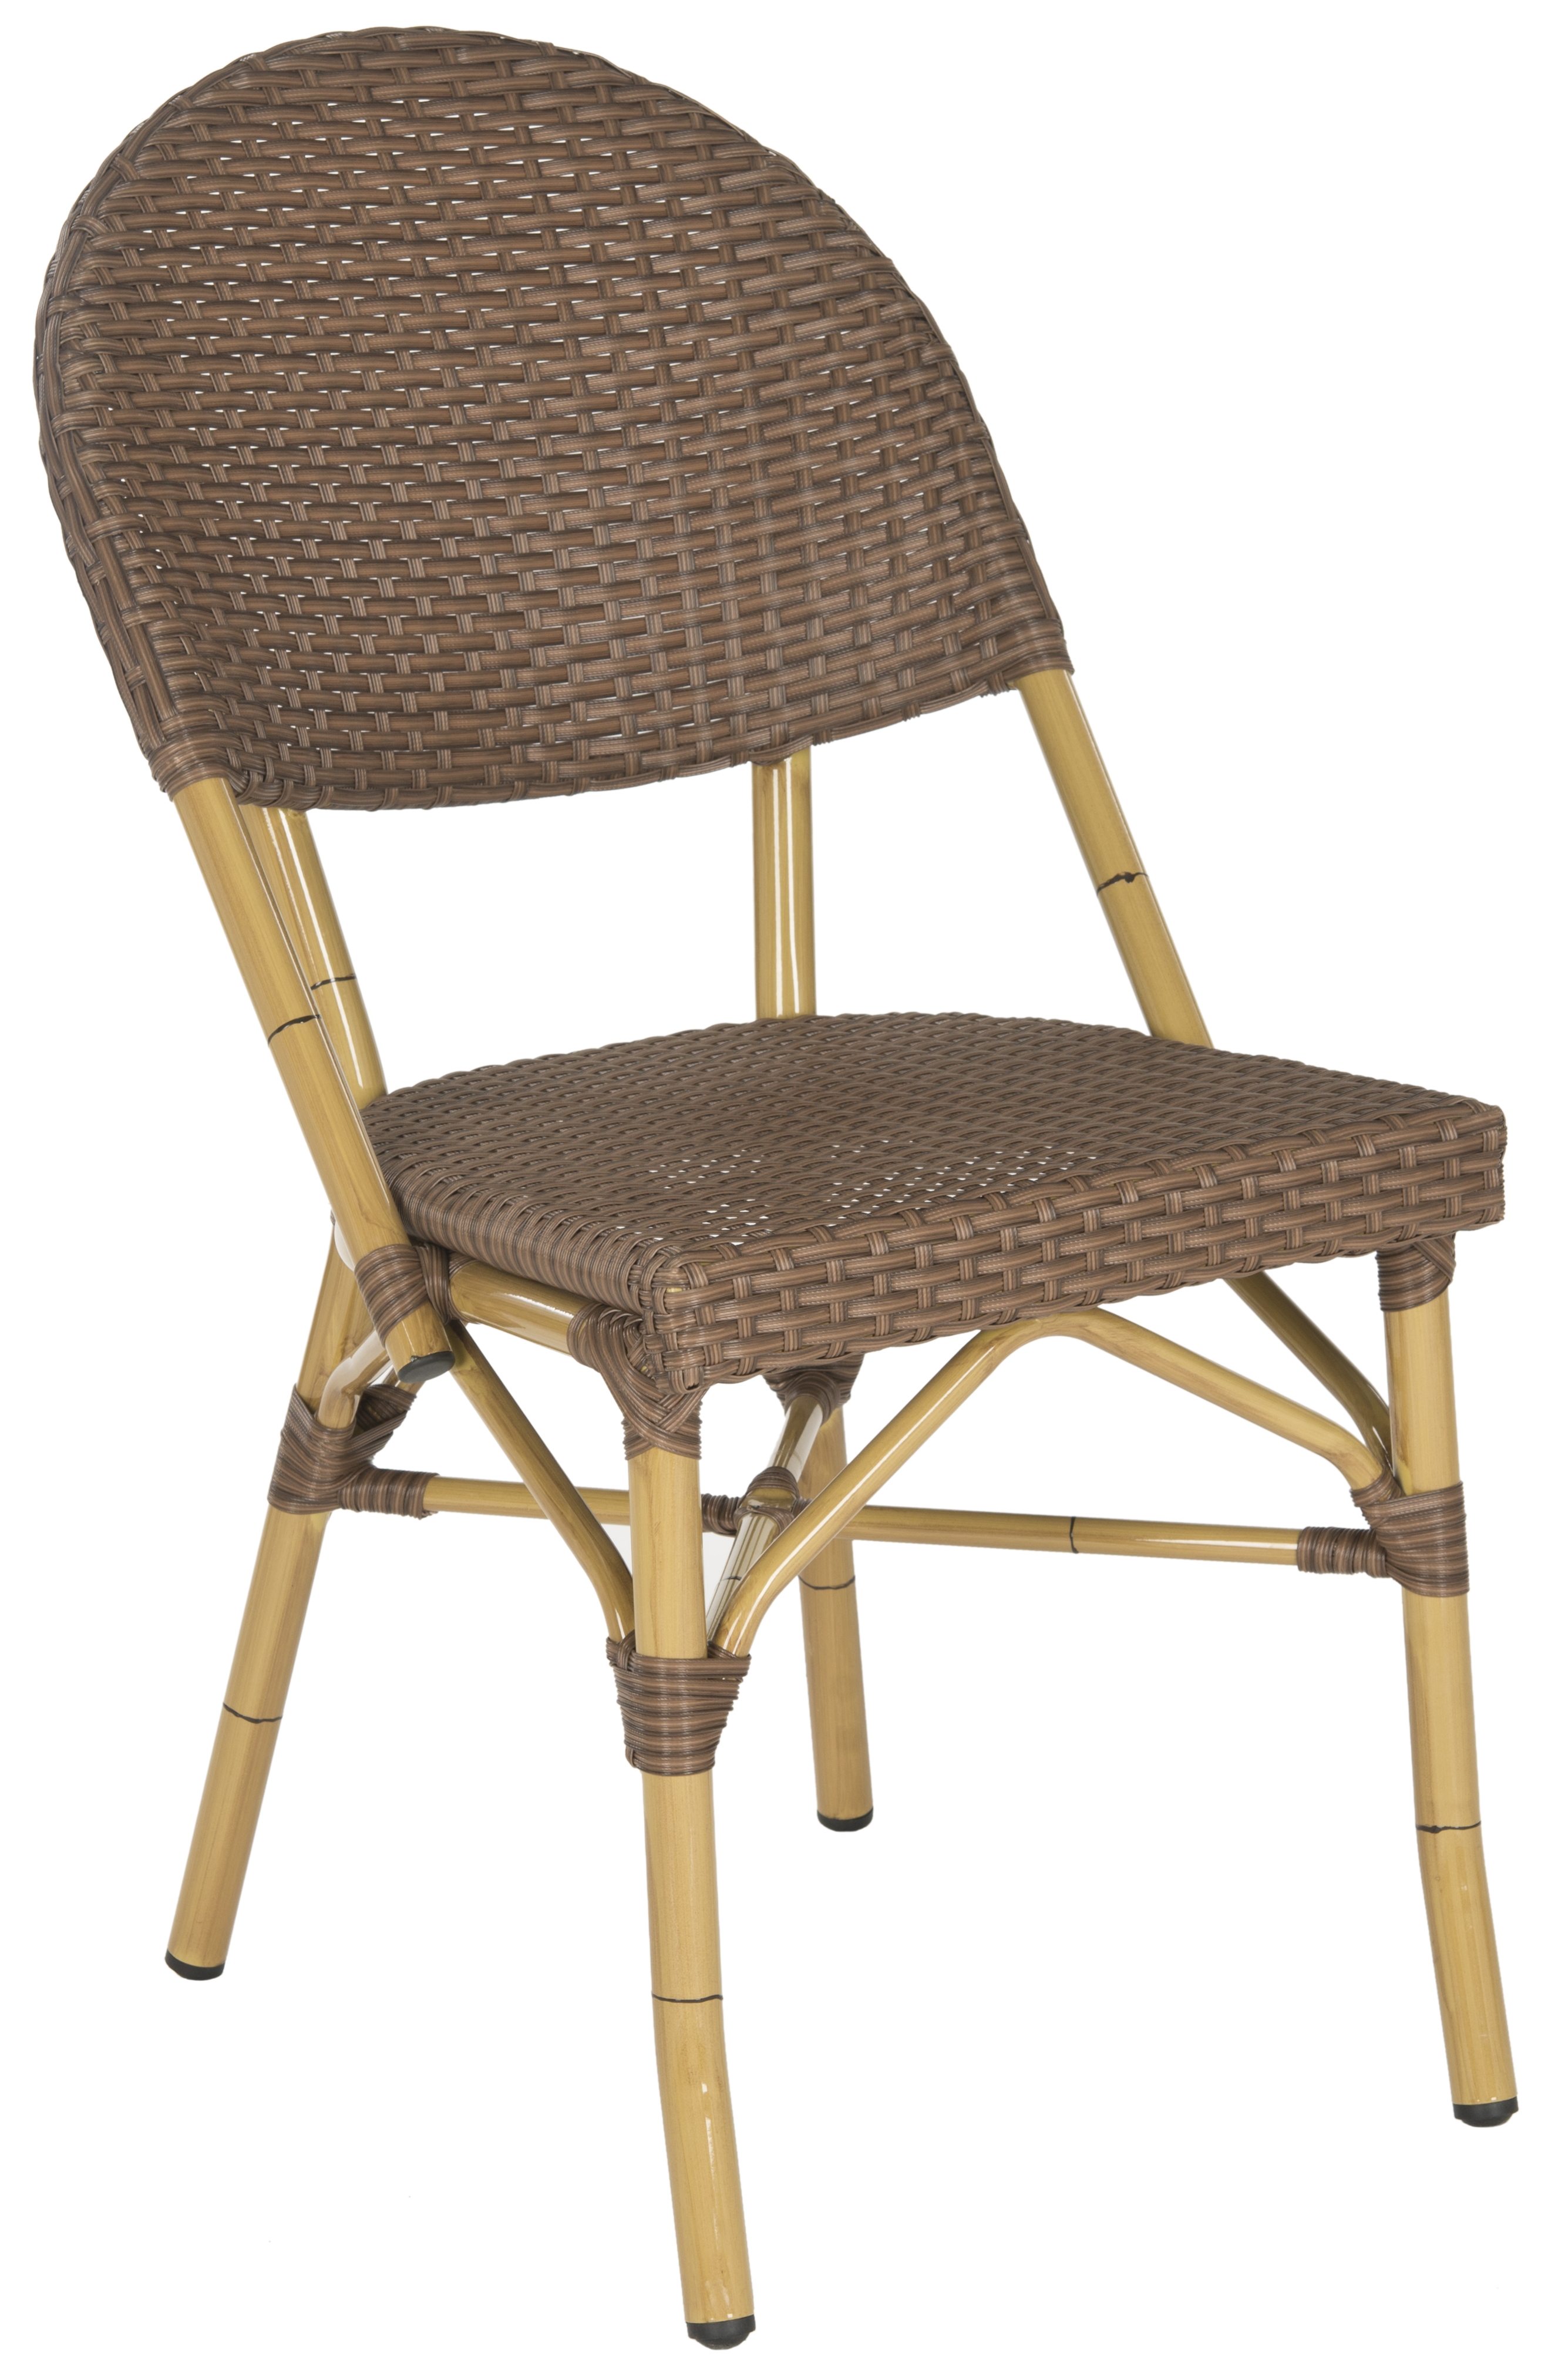 Barrow Stacking Indoor-Outdoor Side Chair - Brown - Arlo Home - Image 2